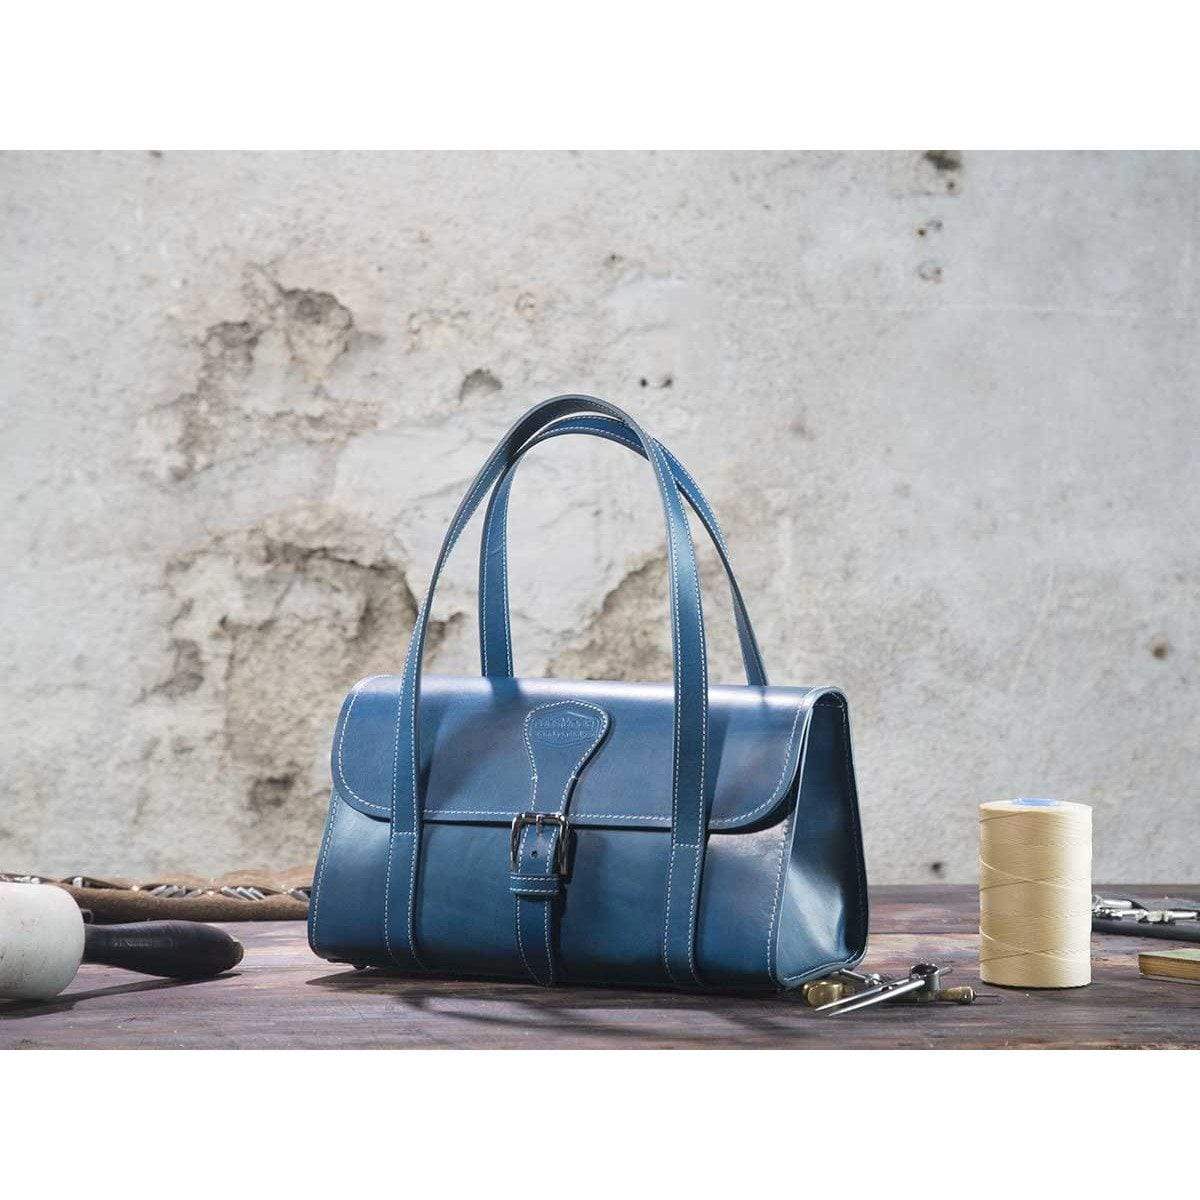 Constancia Made in Italy Women Handbags Shopping and Tote Bag